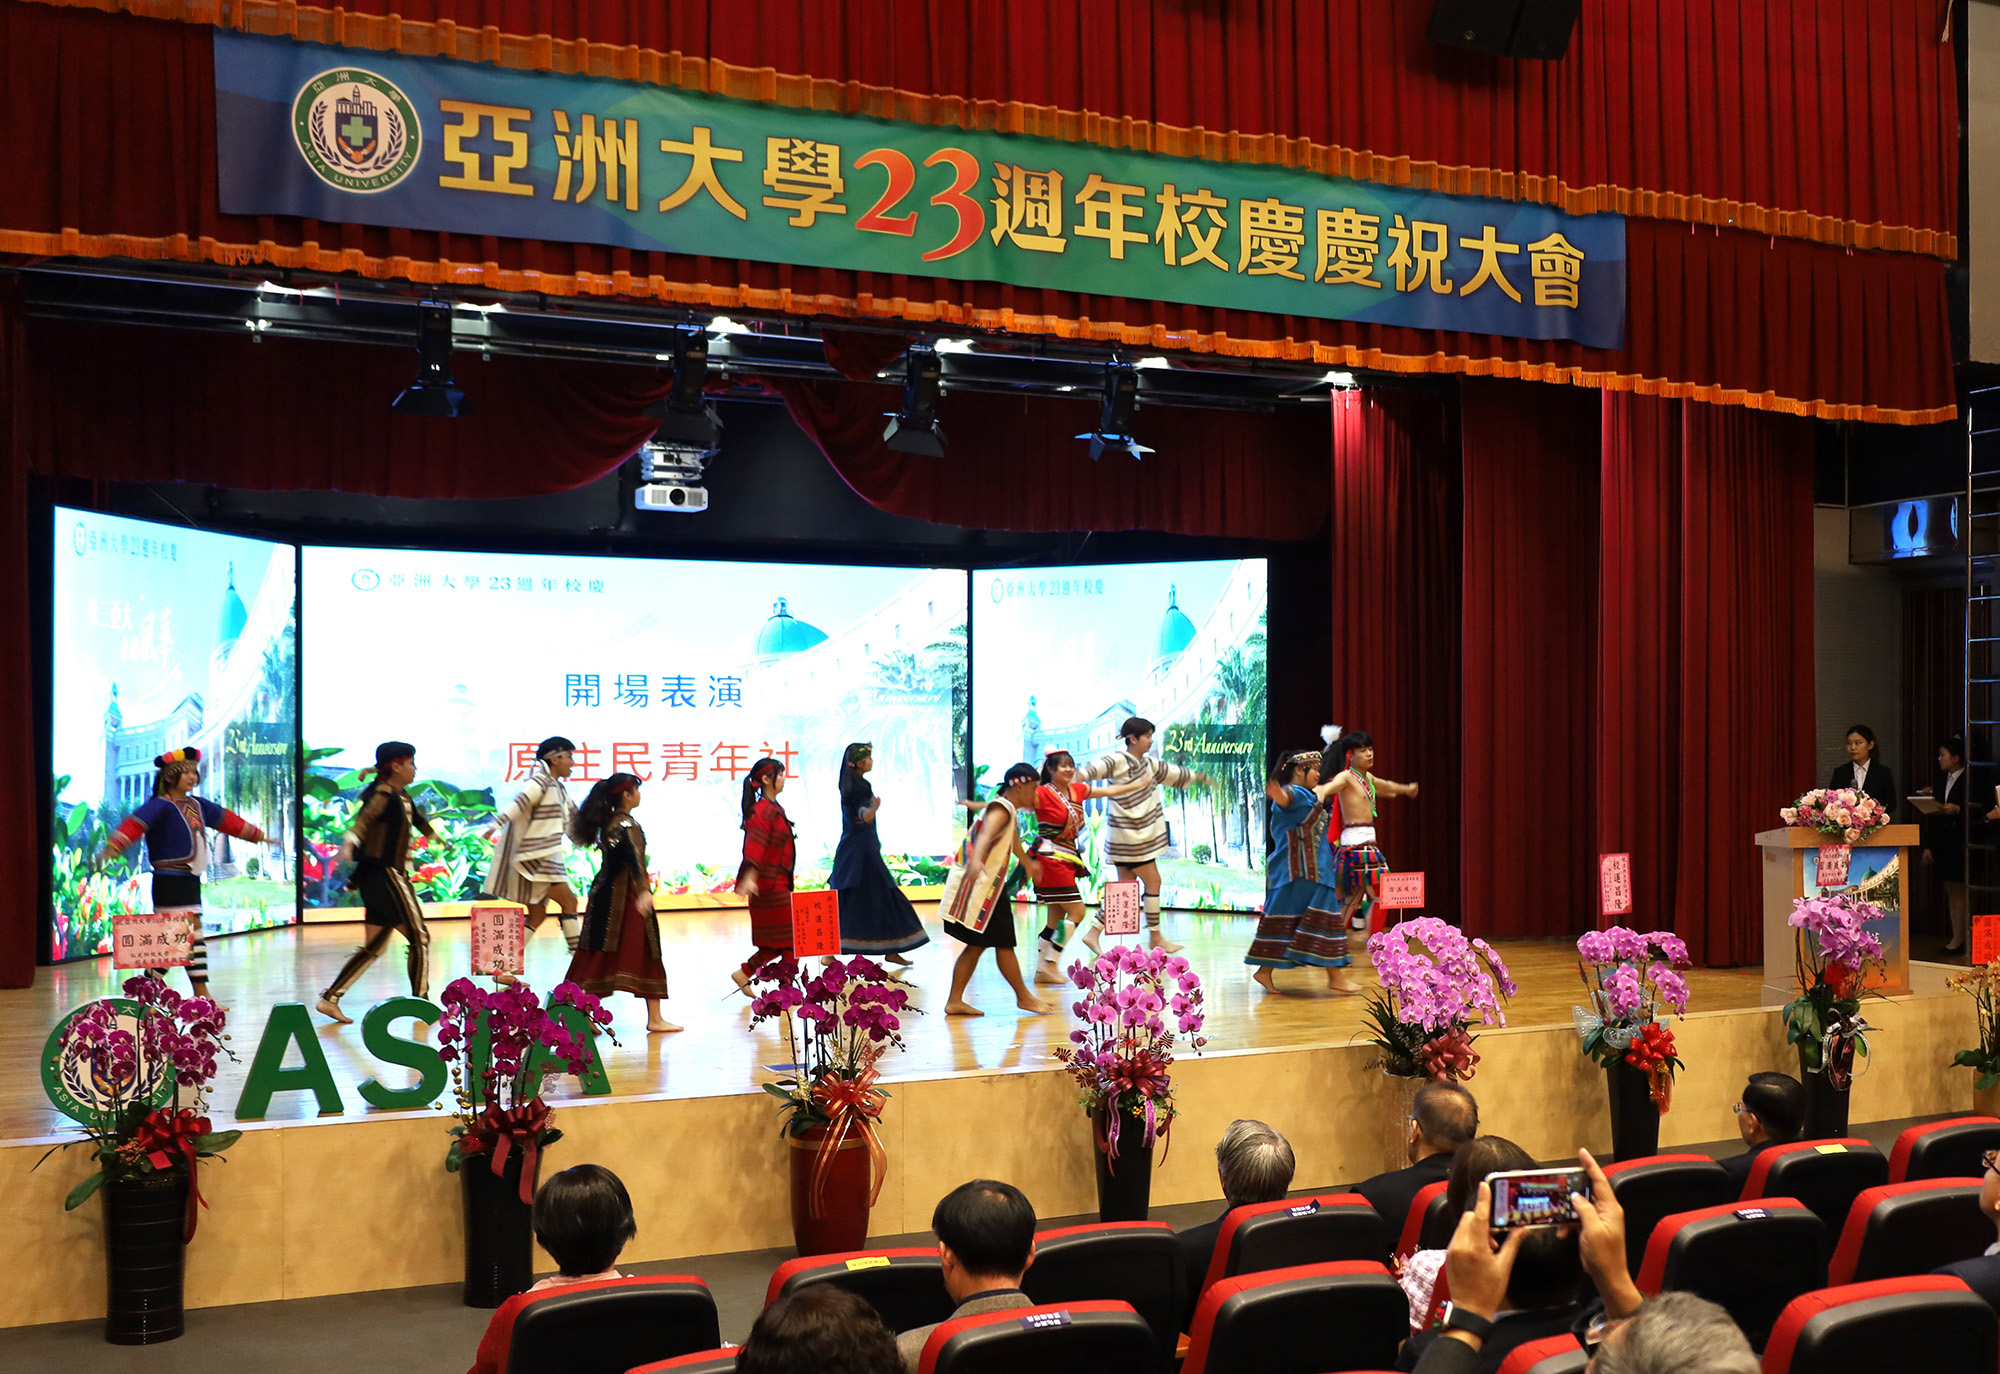 Asia University's Indigenous Dance Club kicked off the 23rd anniversary celebration